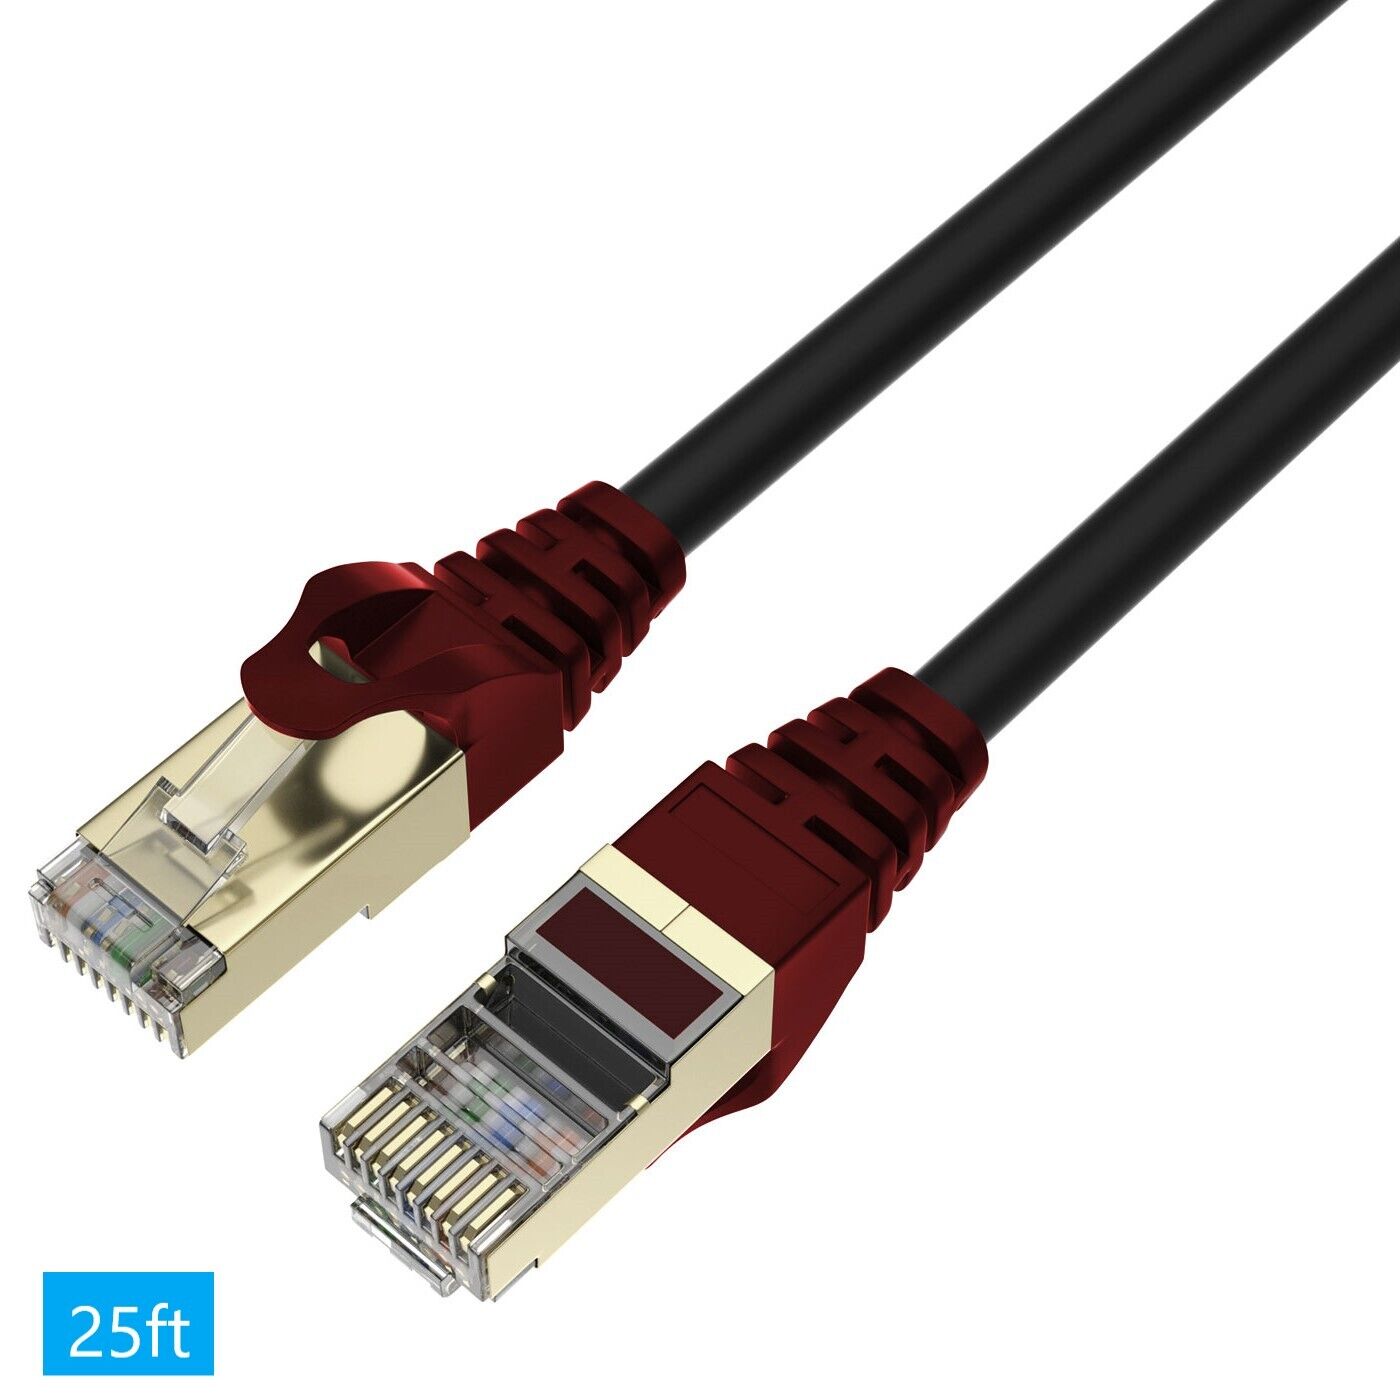 CAT 7 High-Speed Ethernet Cable - Outdoor